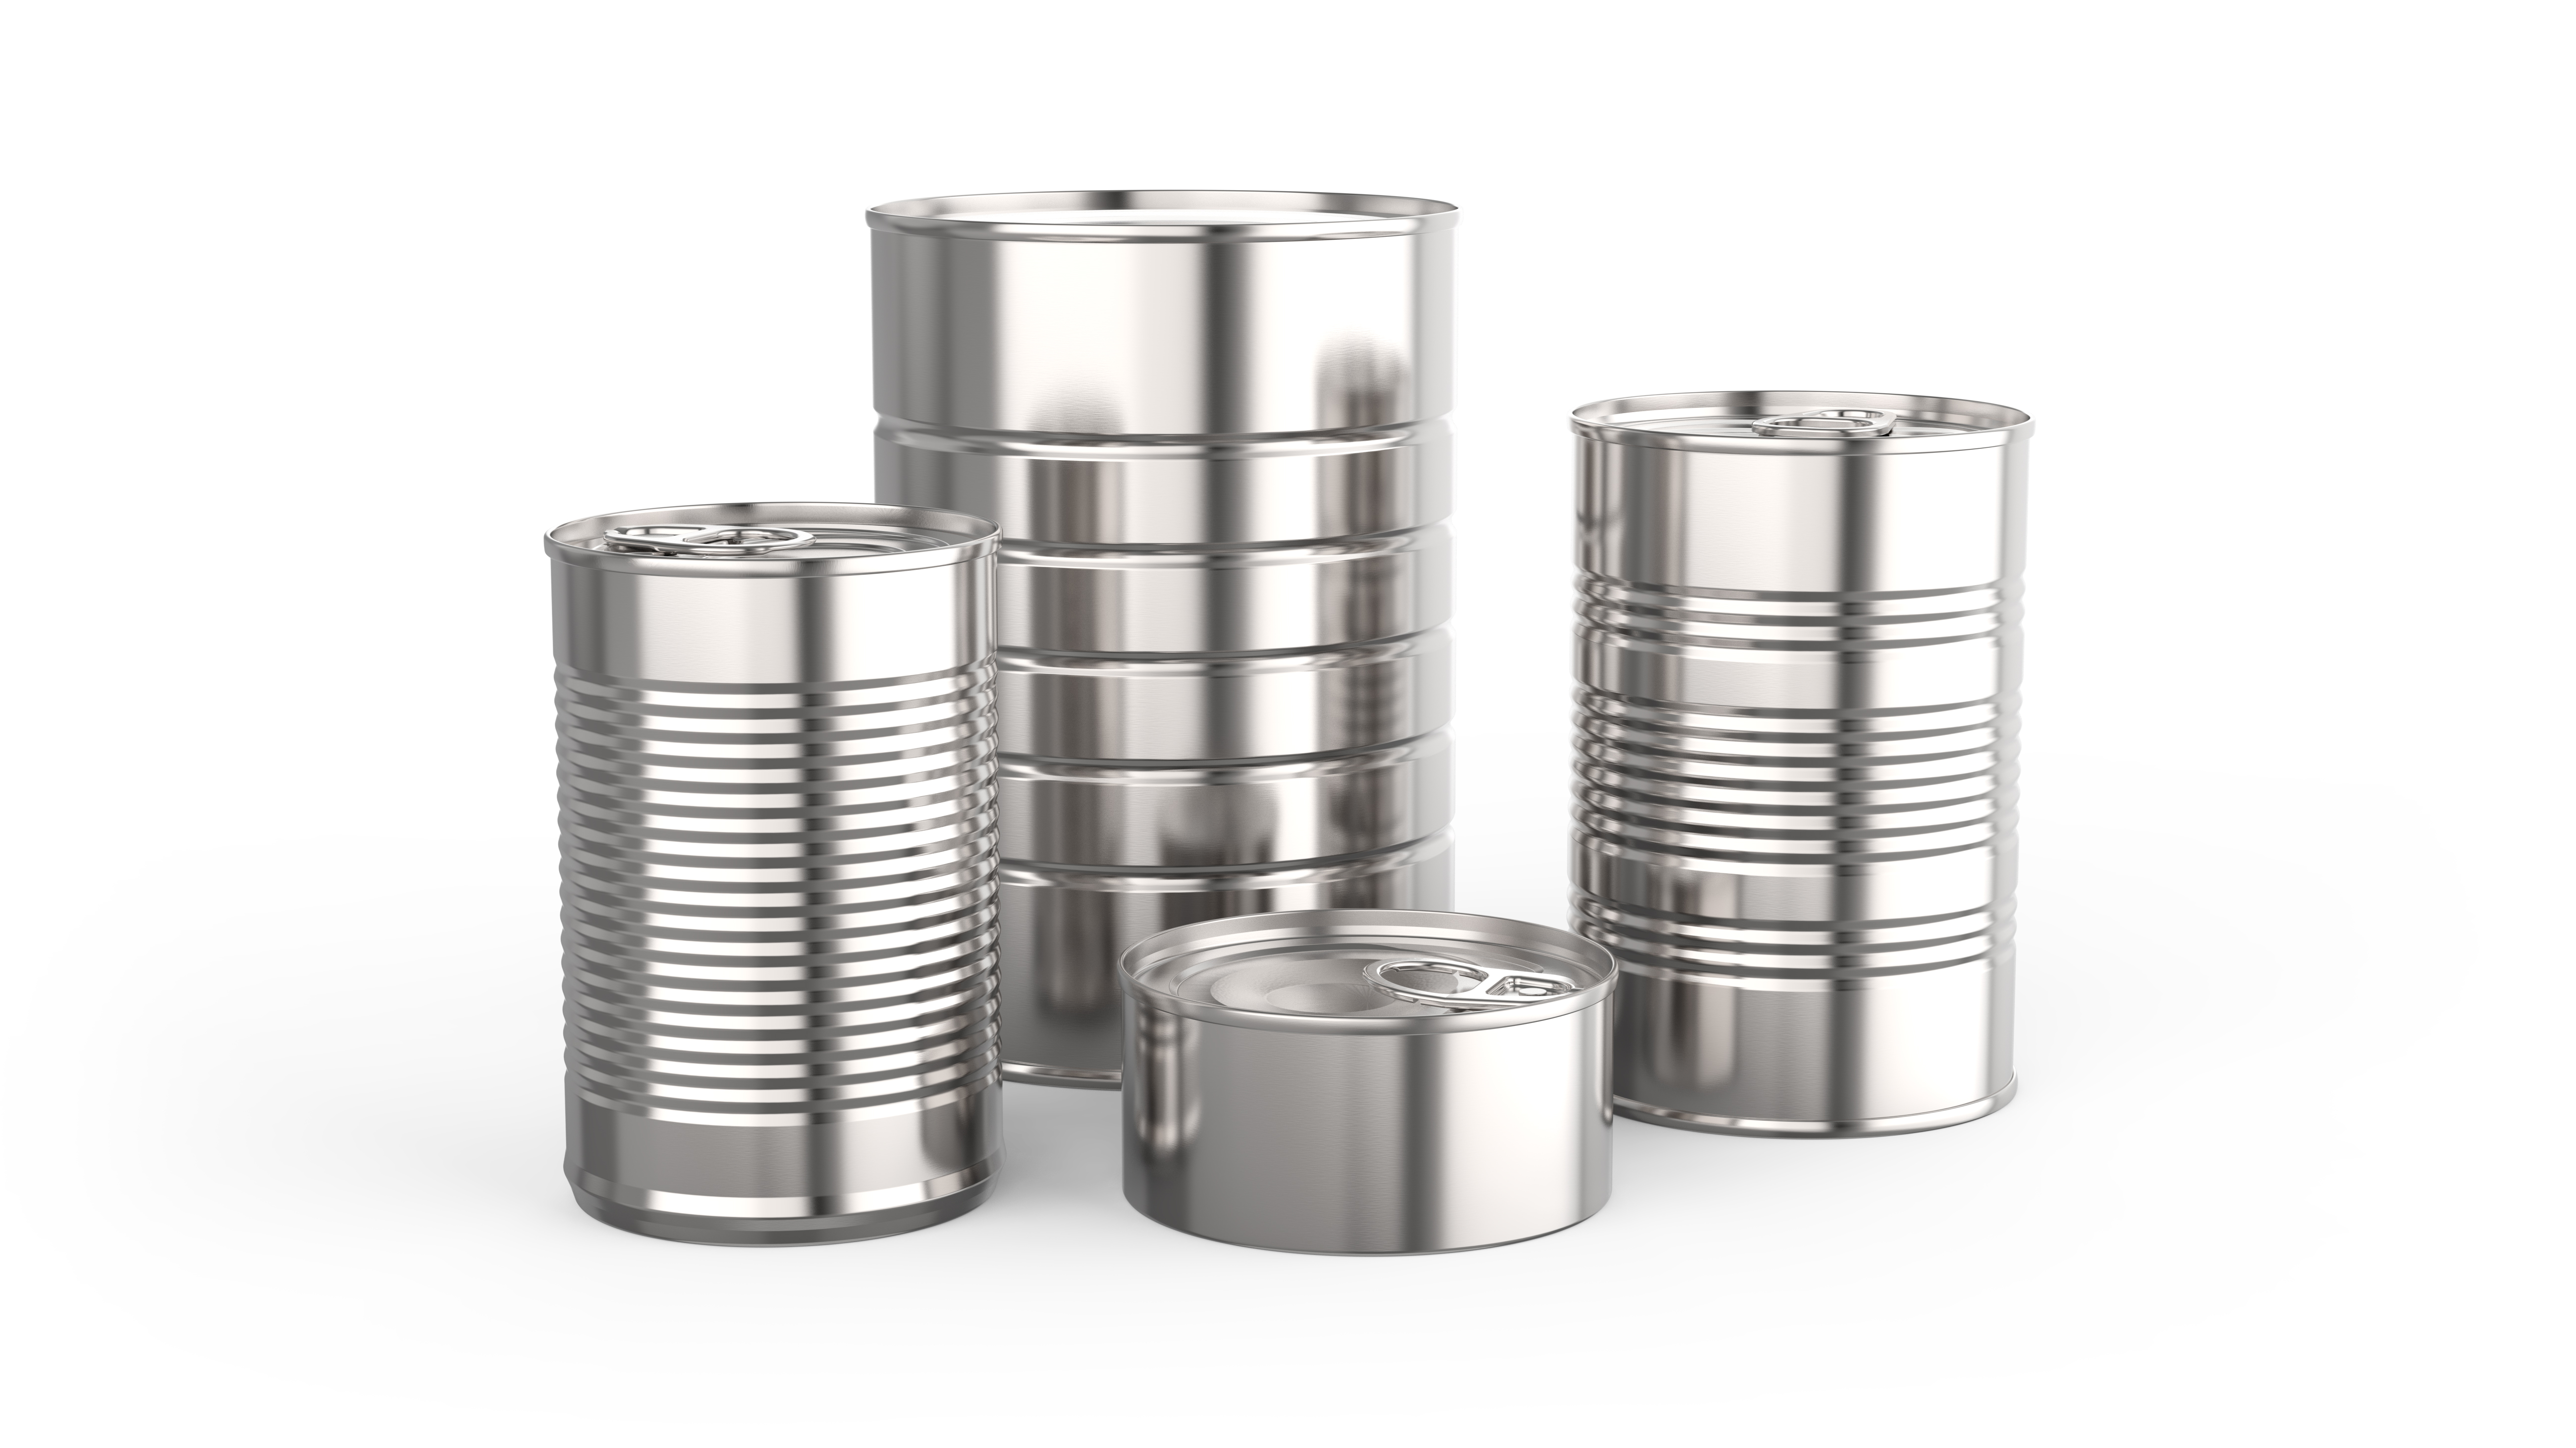 4 metal food cans of various sizes